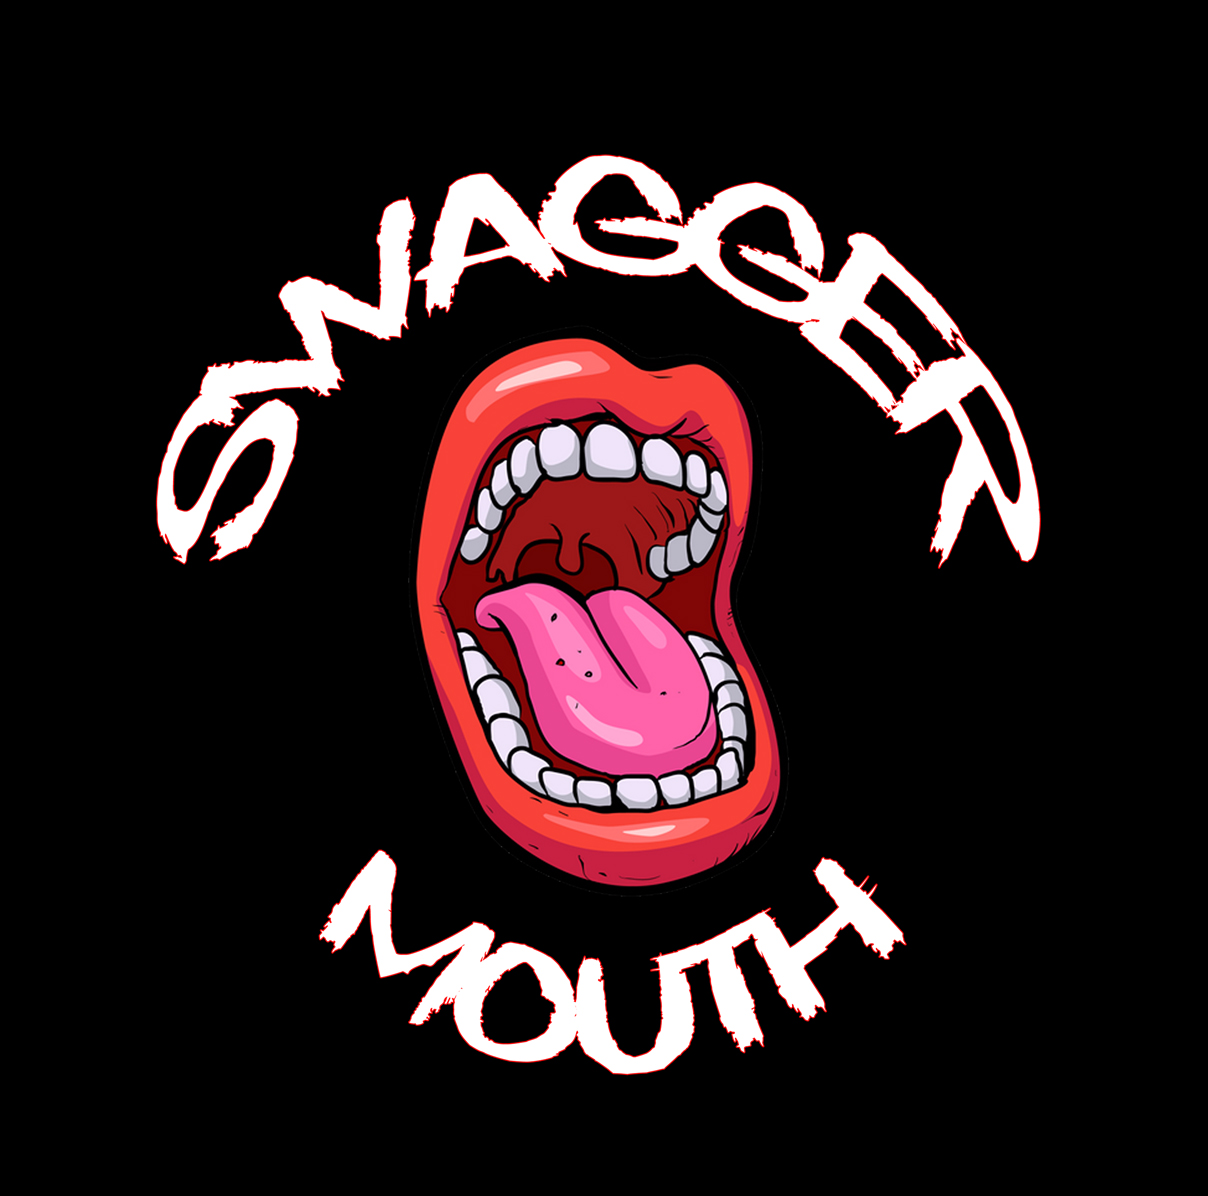 Swaggermouth